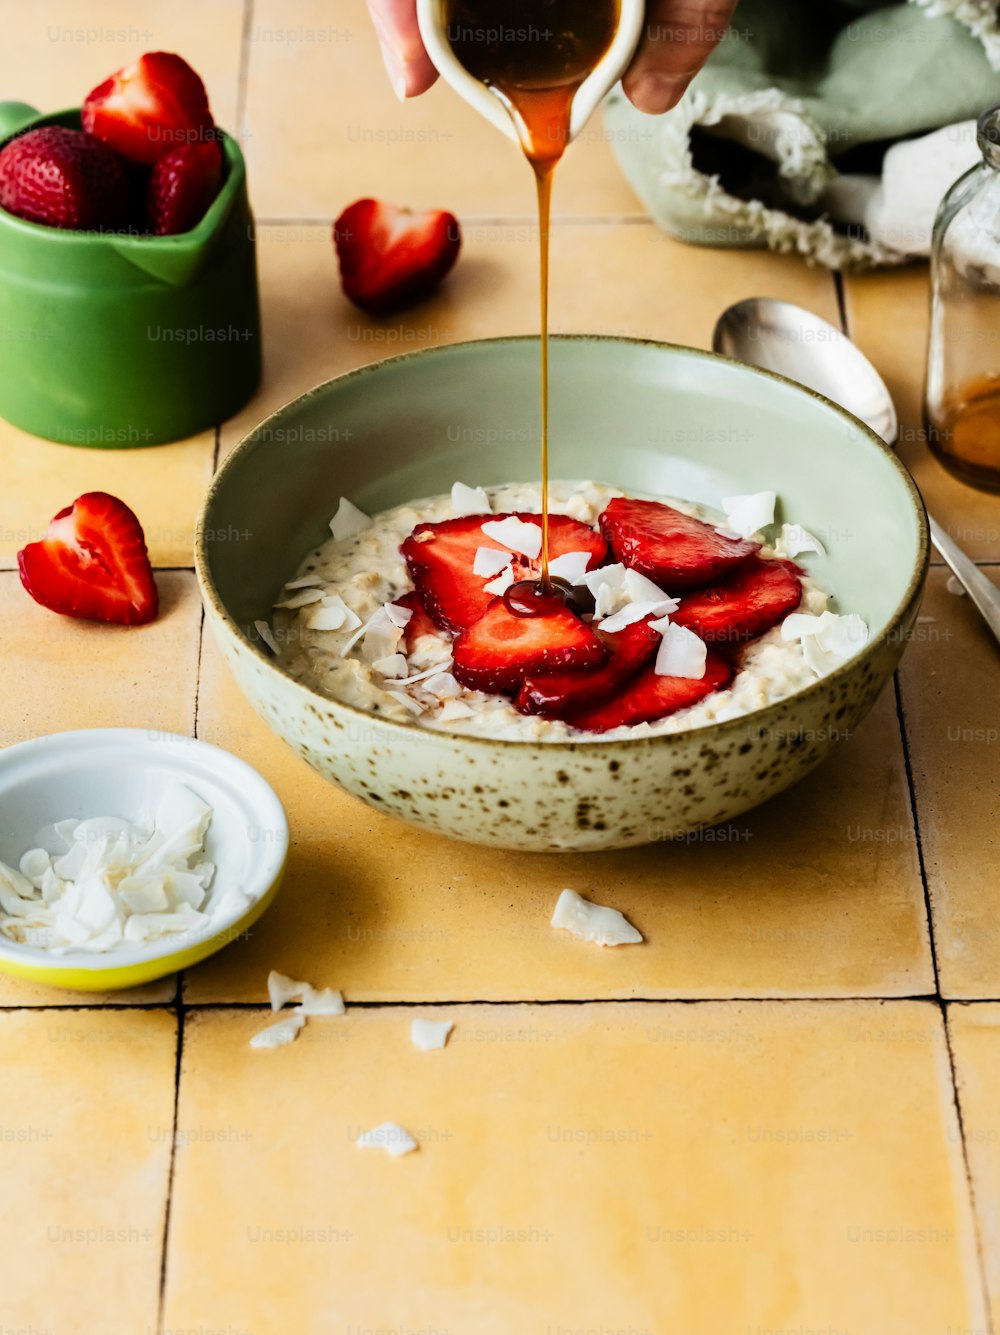 a bowl of oatmeal with strawberries being drizzled with